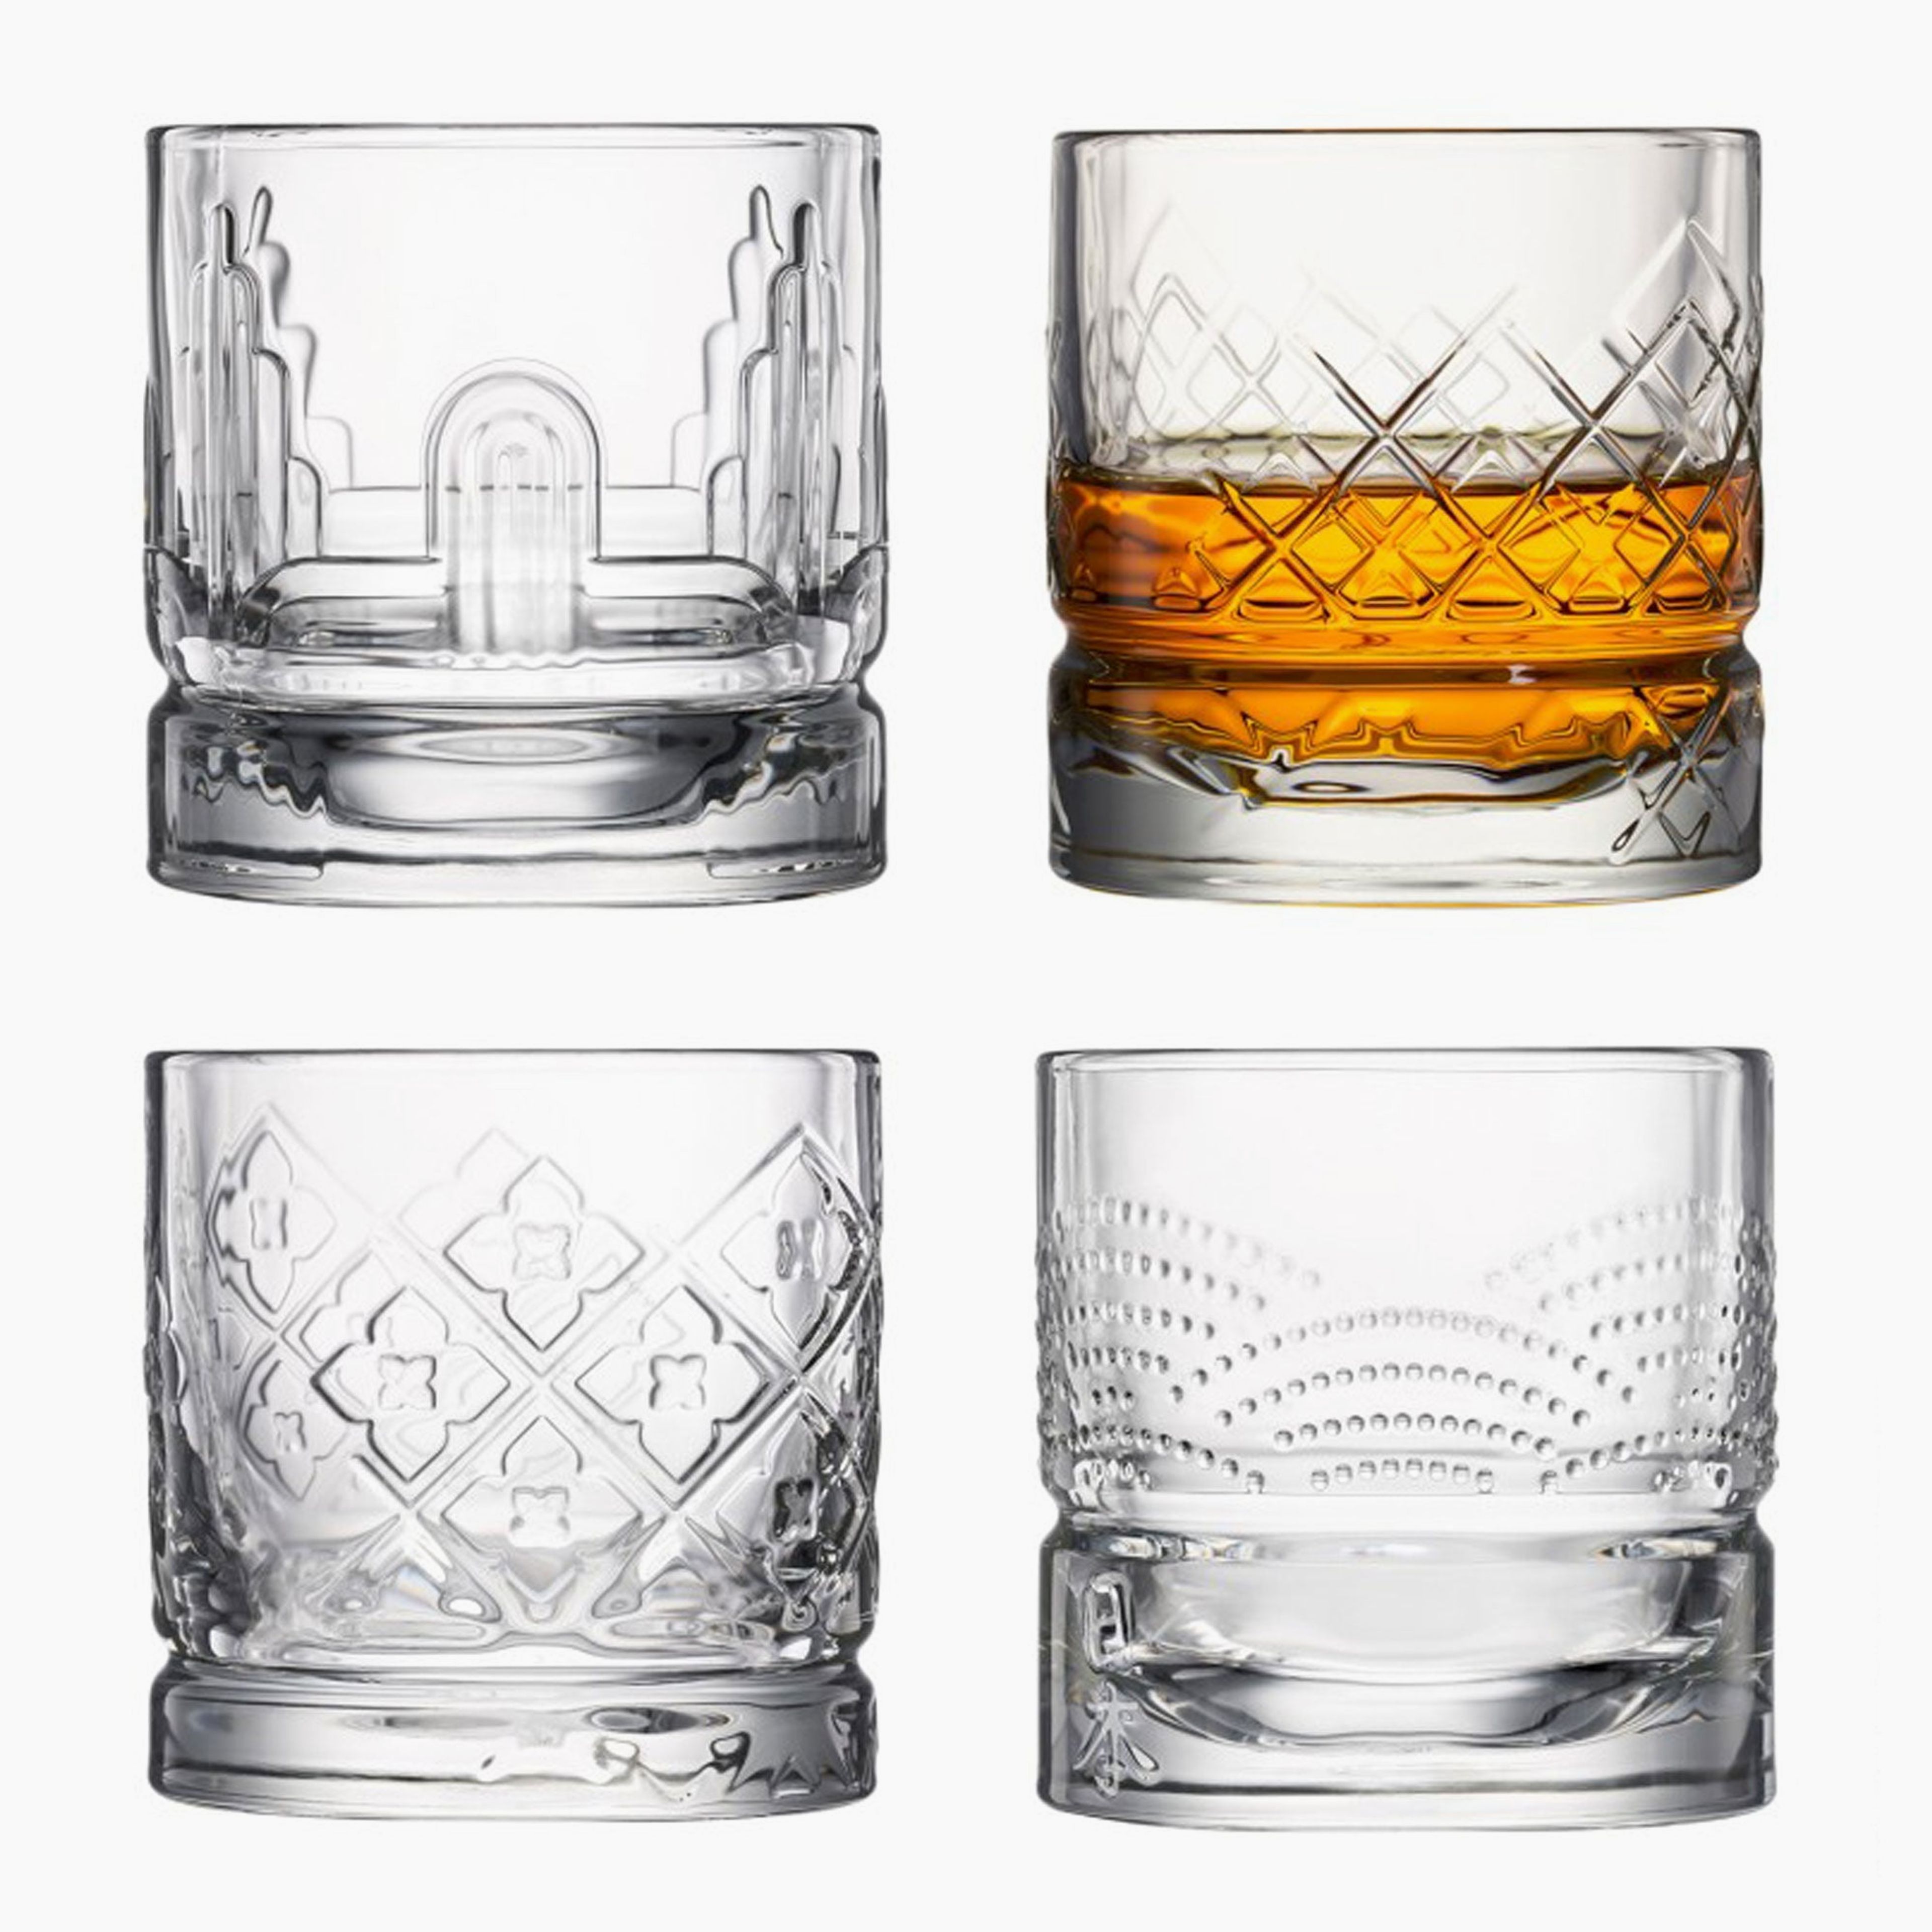 Dandy Whiskey Glasses - Assorted Set of 4